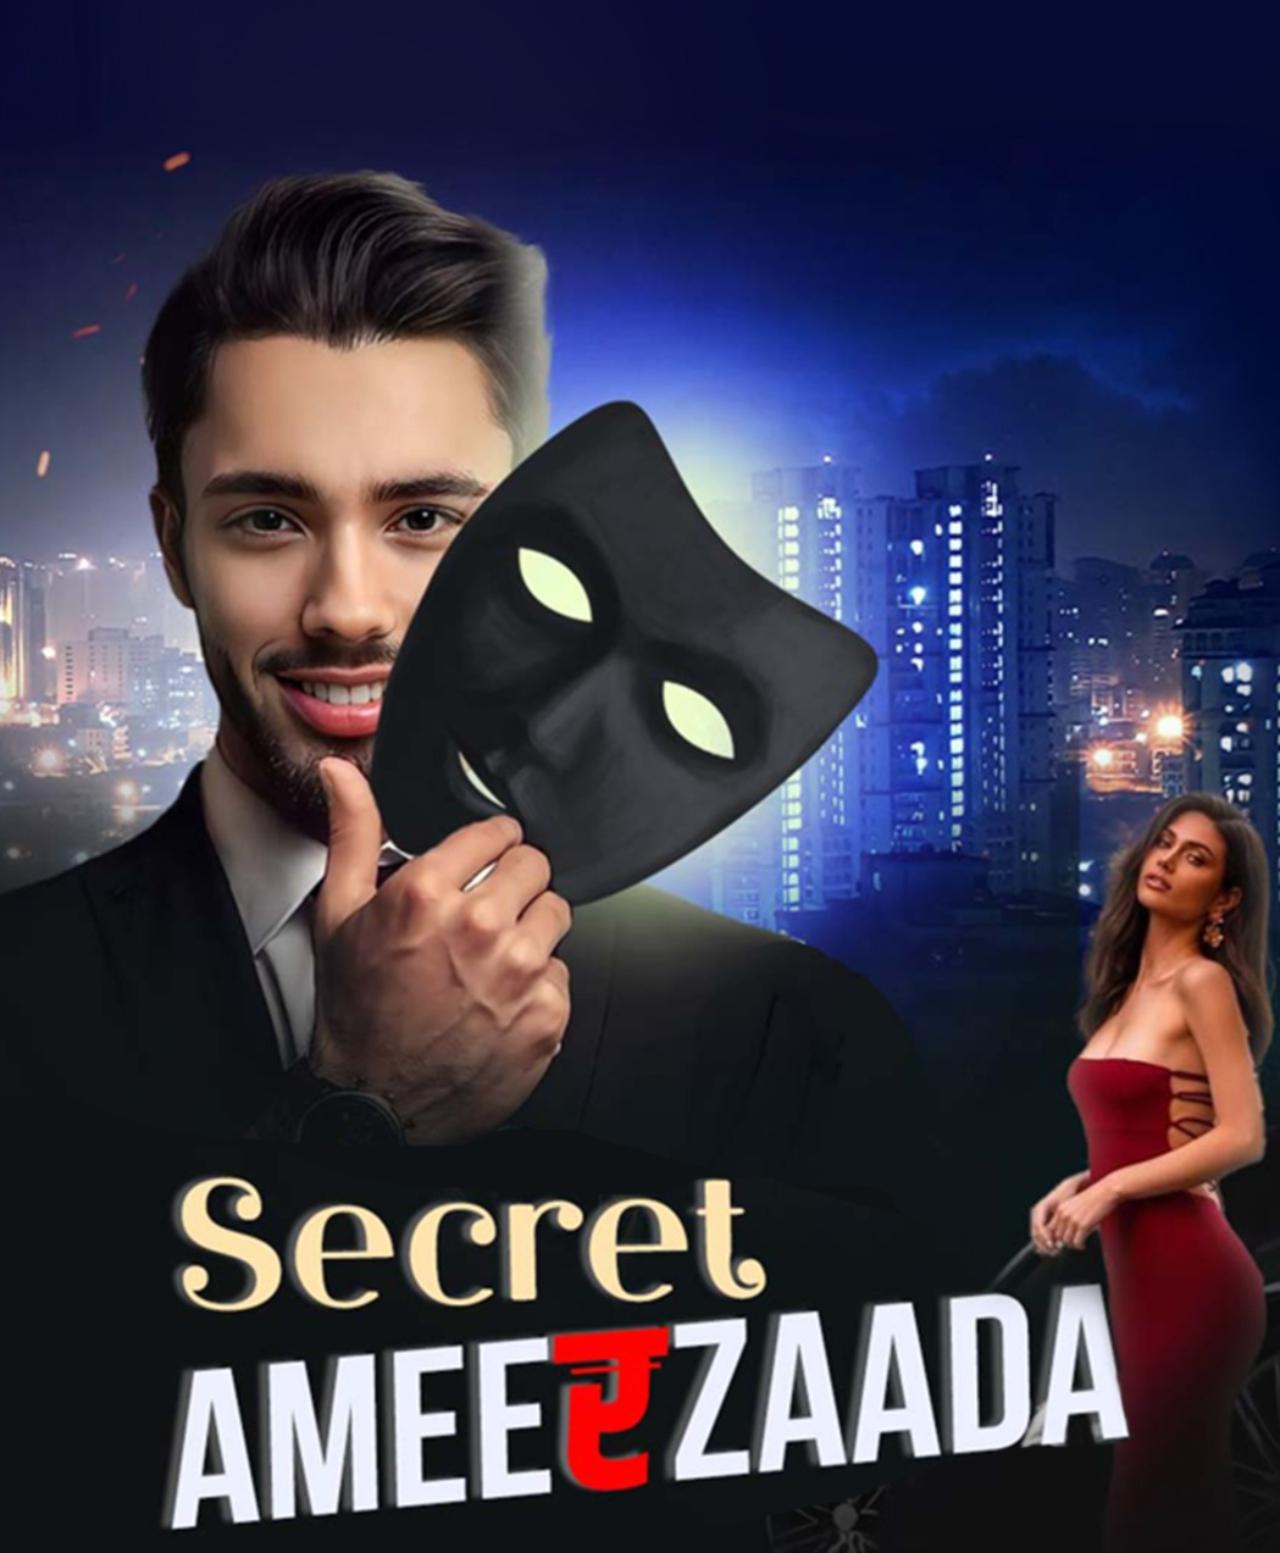 Secret Ameerzada
Unleash a riveting tale of love, deceit, and power with Pocket FM's Secret Ameerzada. Follow the story of Ahan Raizada, a man who's been living a secret life as the illegitimate son of one of the country's wealthiest families. After marrying Shanaya Gill, Ahan's true identity is revealed, and he suddenly finds himself as the heir to the Raizada group of industries. With newfound power and status, Ahan has the chance to win over his wife's love and teach her family a lesson in manners. This audio series will keep you glued to your headphones as you explore the complexities of social status, love, and family dynamics. Don't miss out on this must-listen series that's perfect for your long weekend binge!